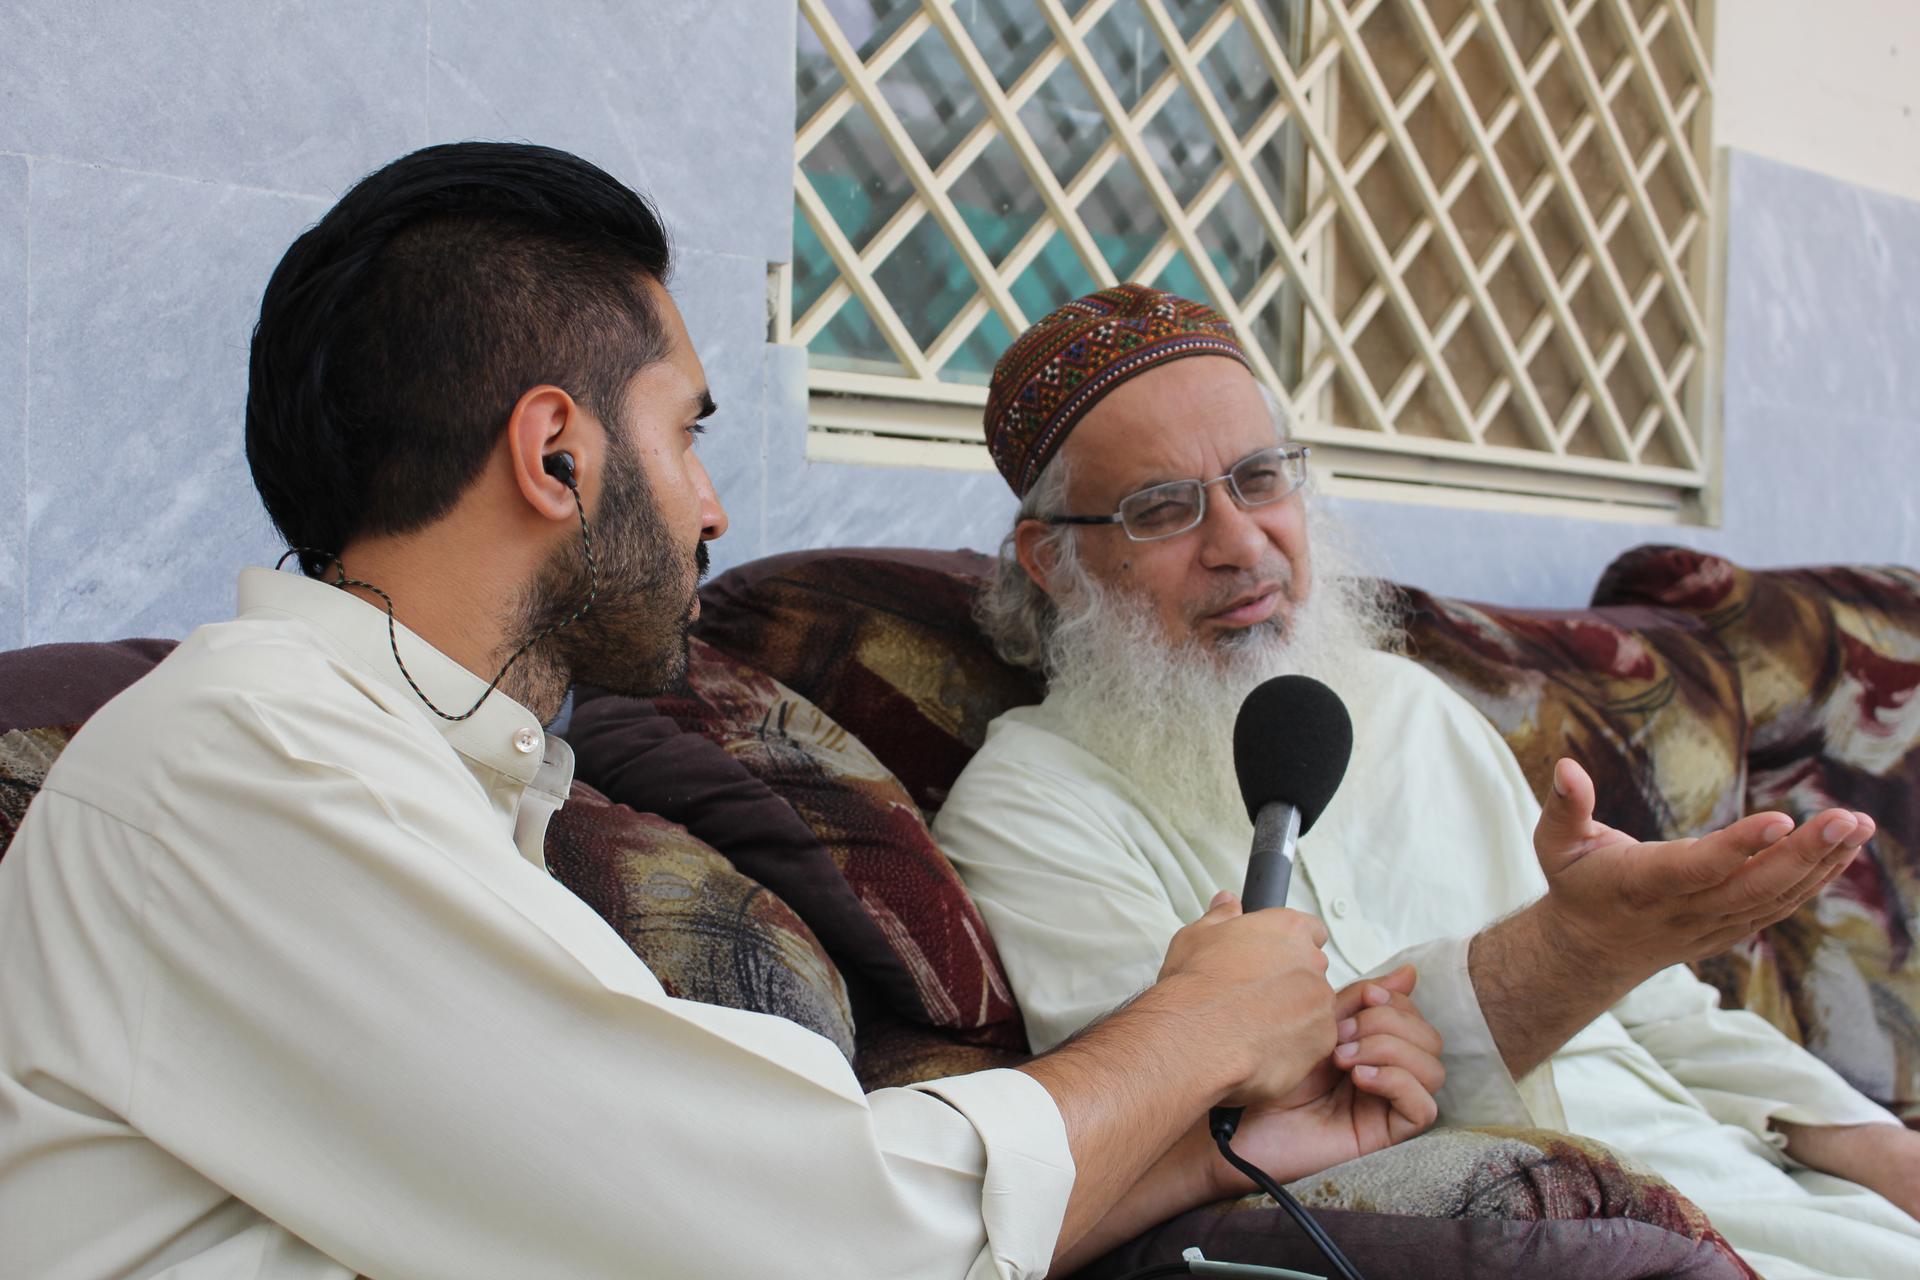 The BBC's Mobeen Azhar speaks to Imam Ghazi, leader of the Red Mosque